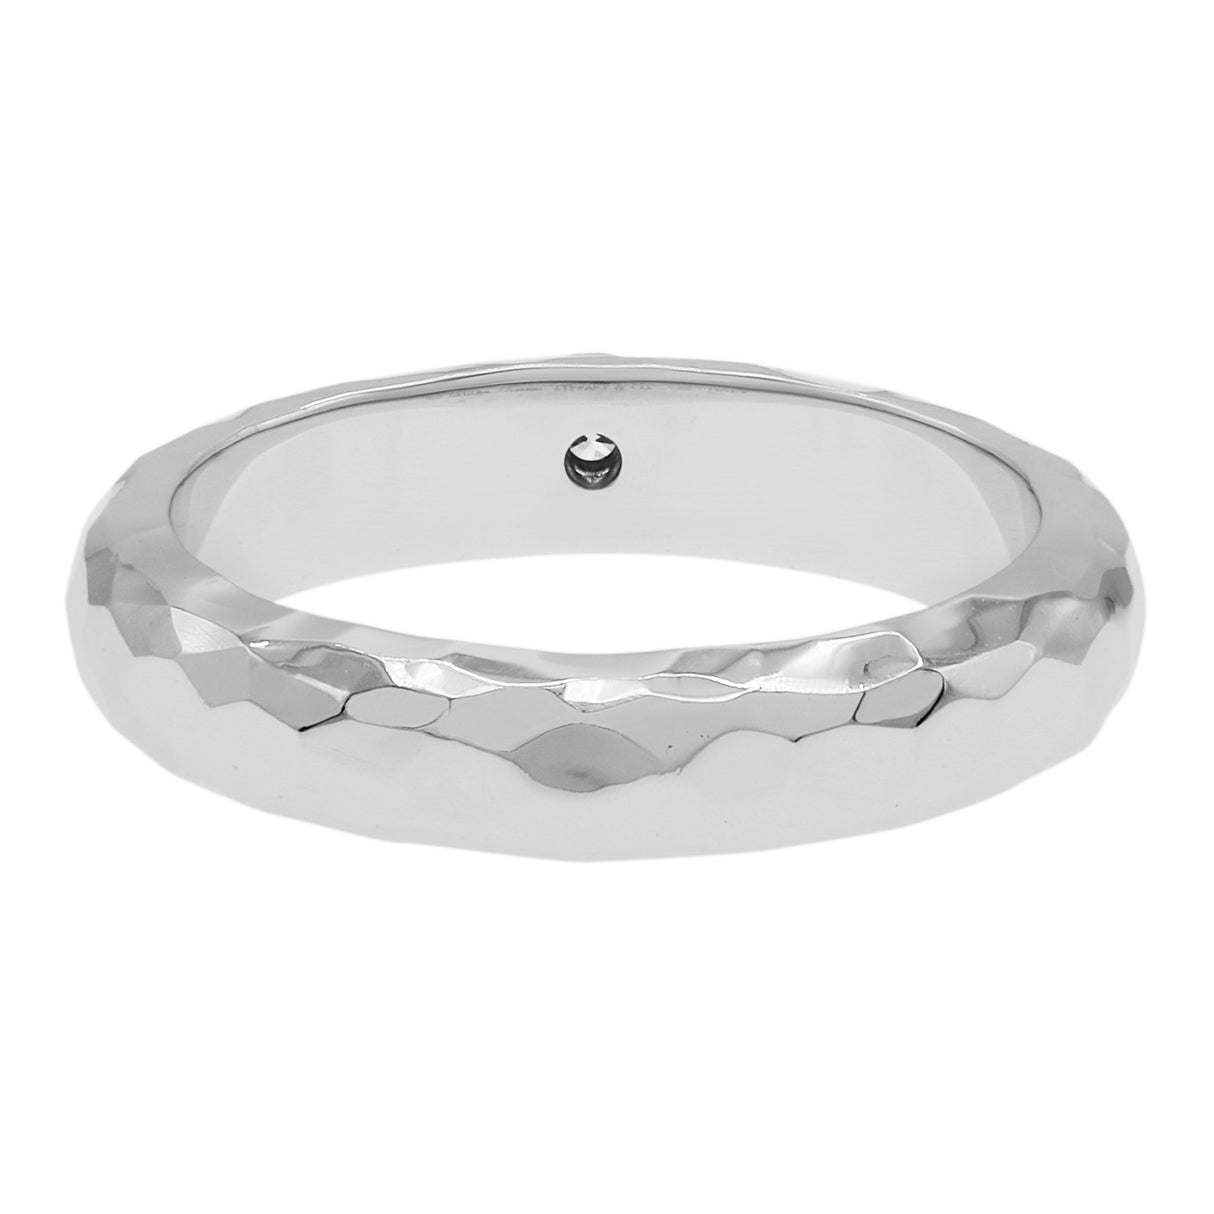 Tiffany & Co. 18K White Gold Paloma Picasso Hammered Solitaire Ring